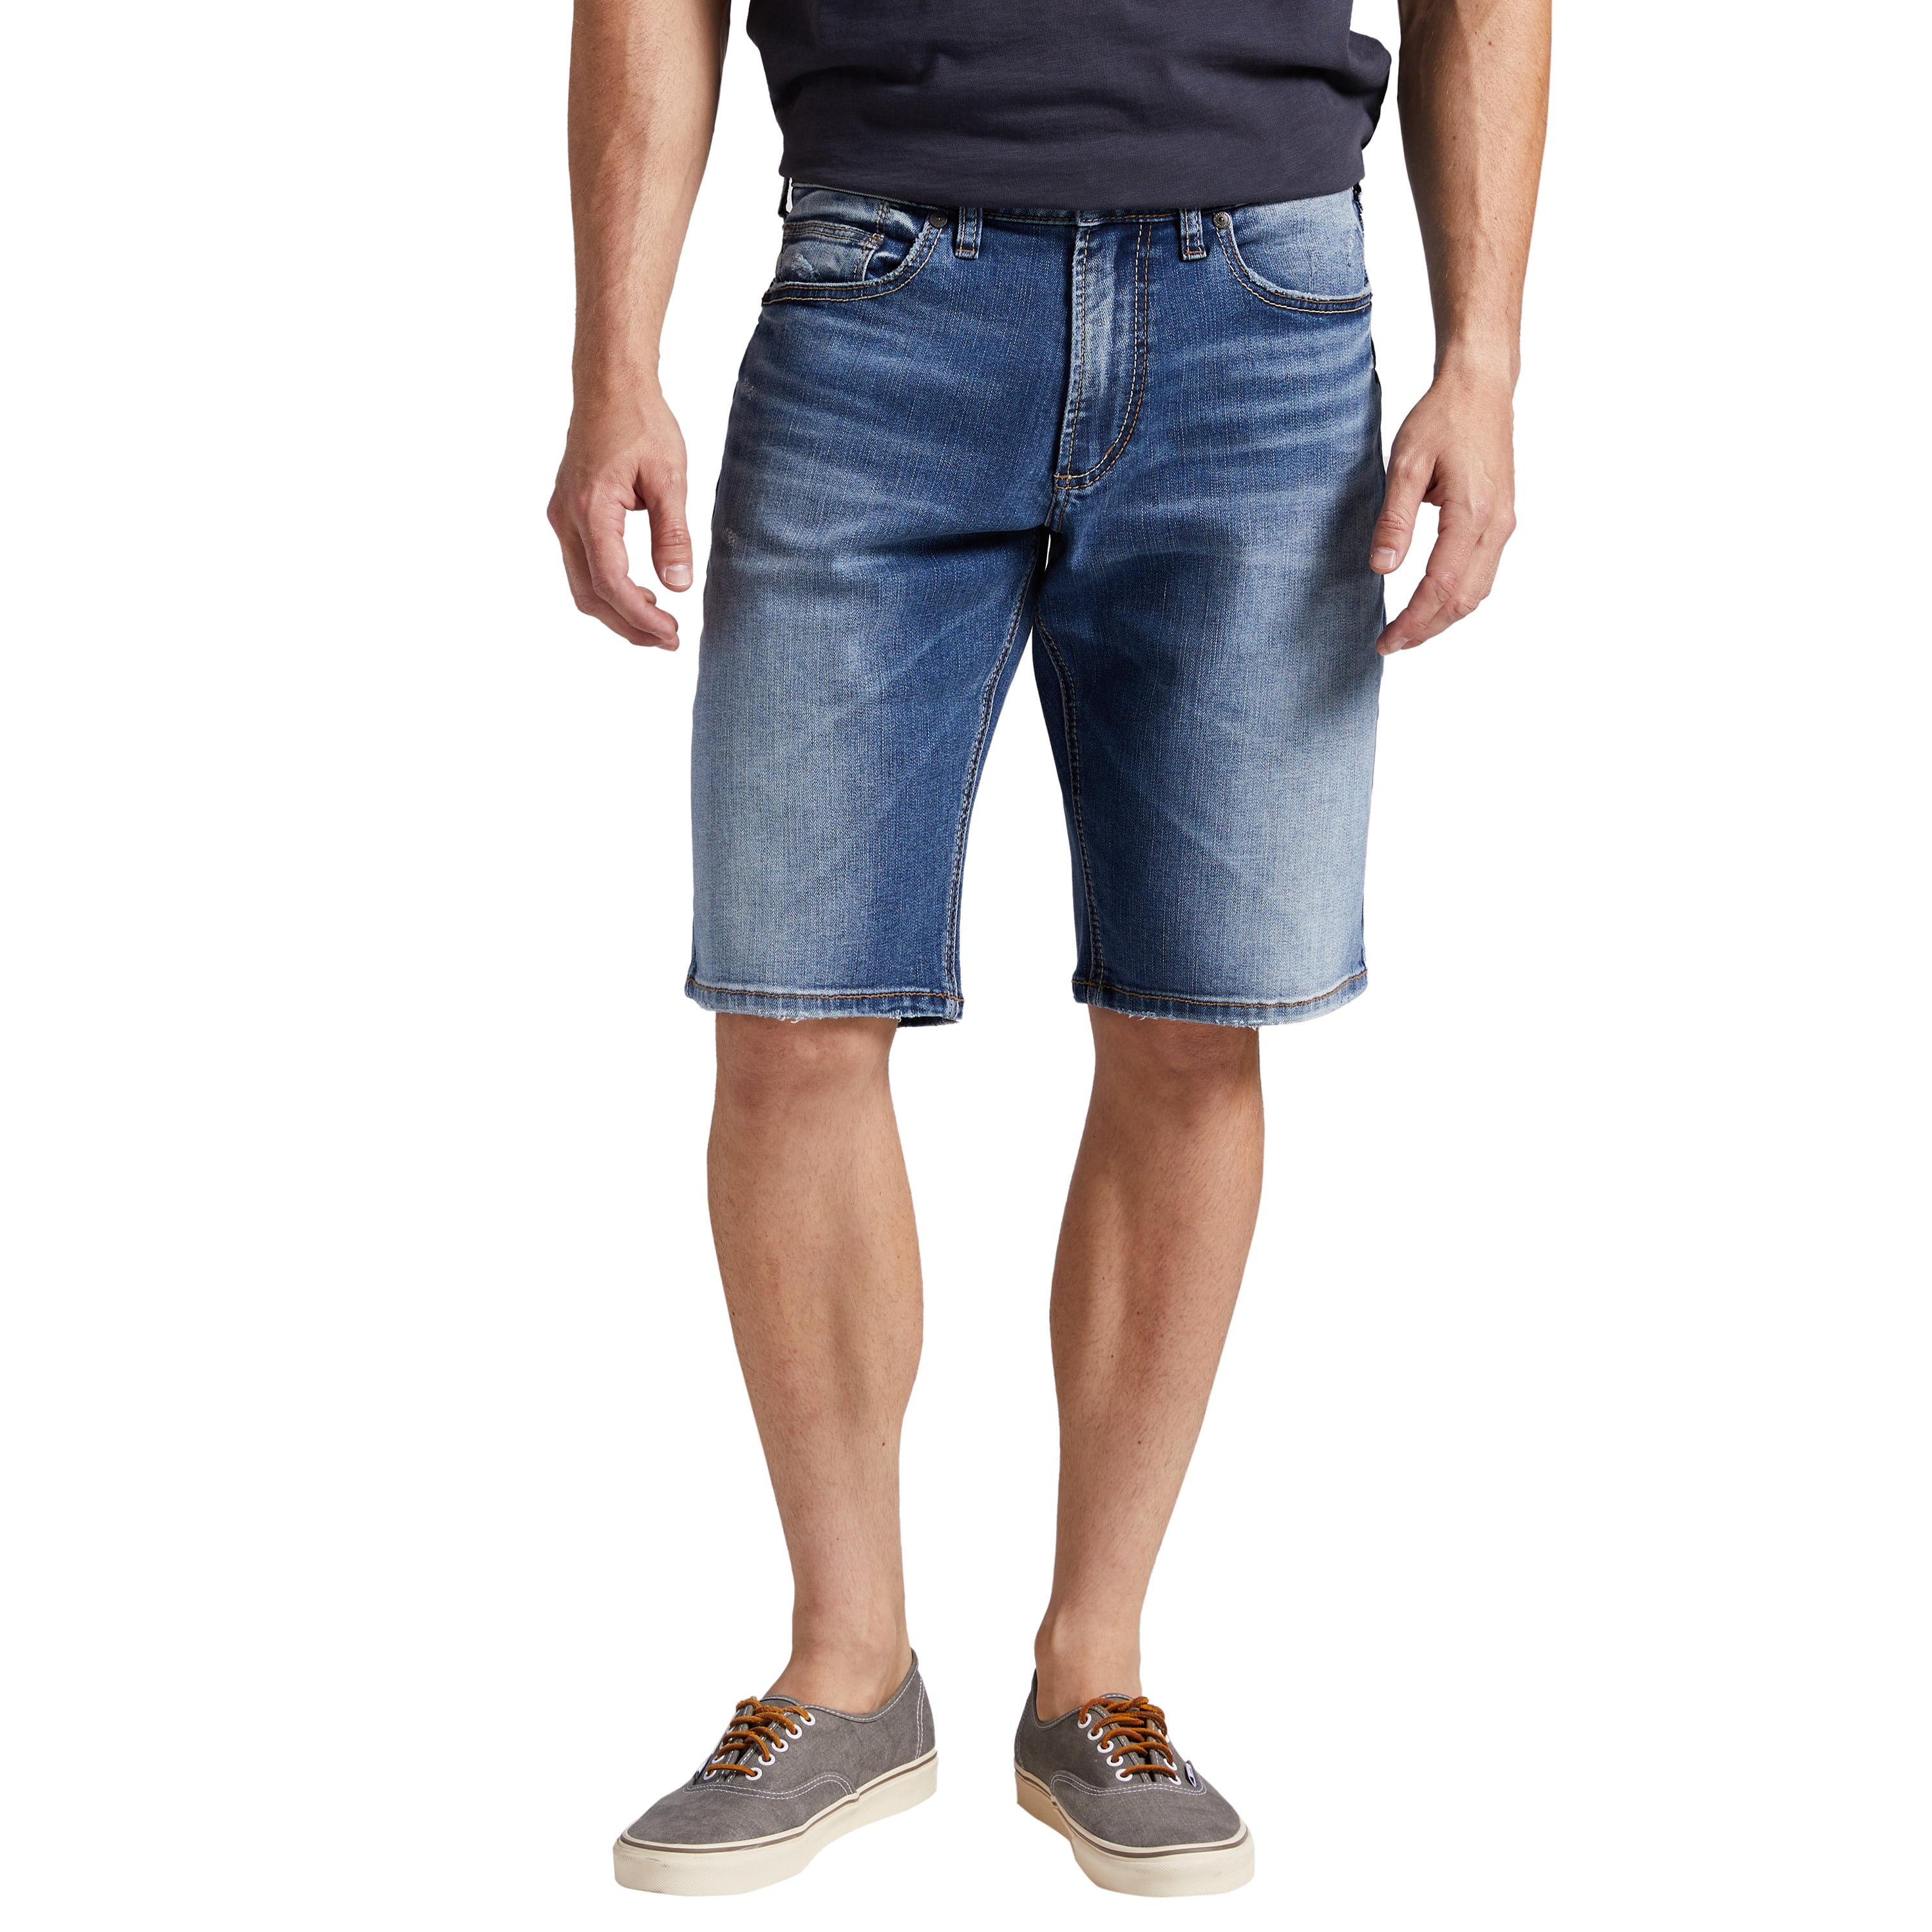 Silver Jeans Co. Men's Zac Relaxed Fit Short, Waist Sizes 30-42 ...